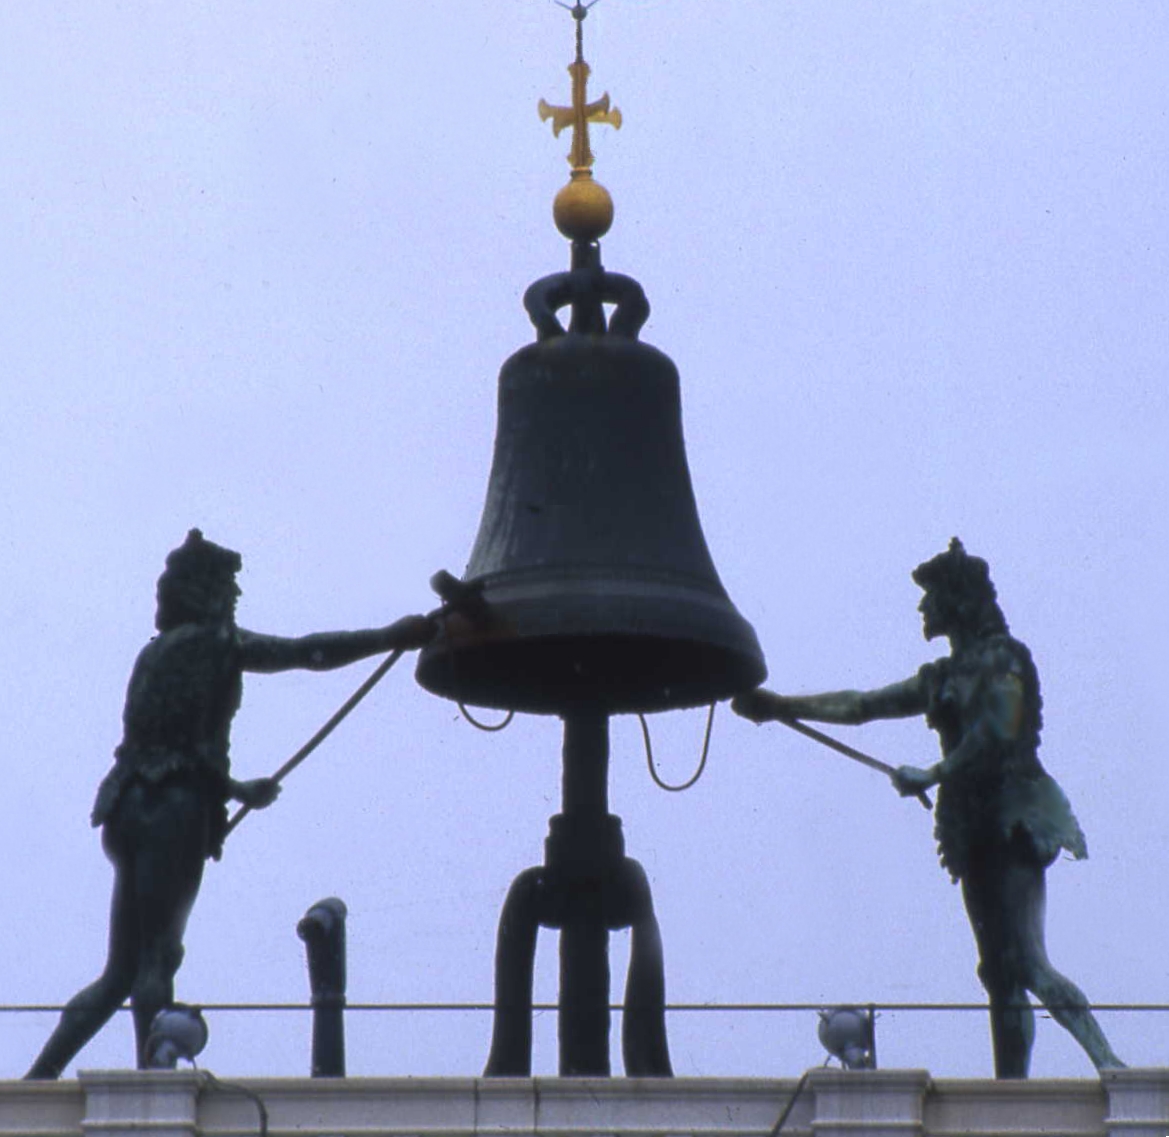 Two men and the bell